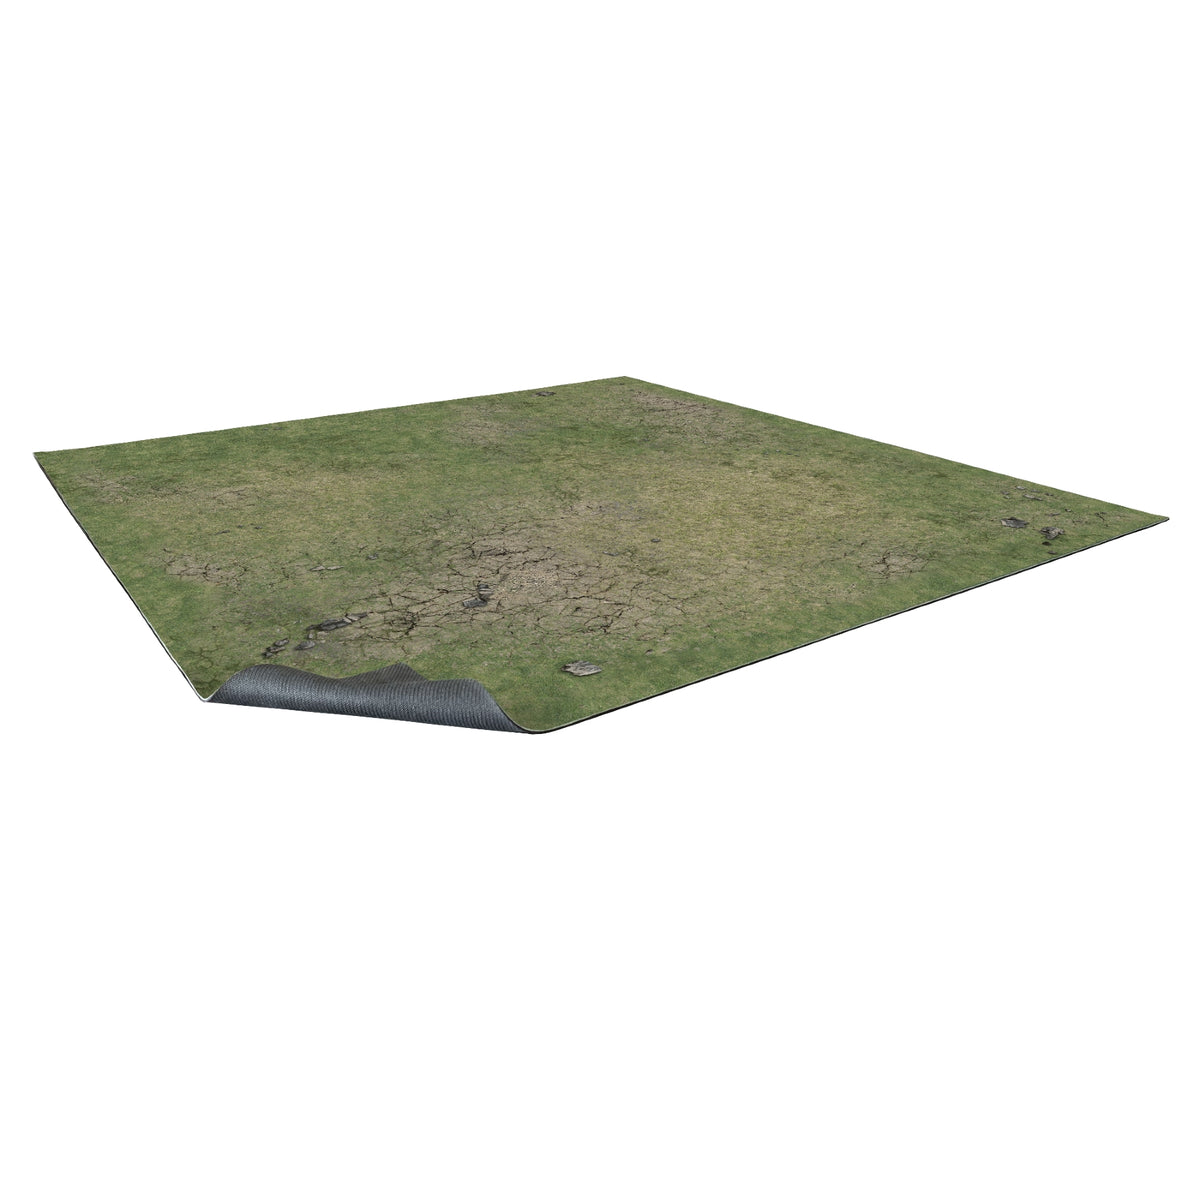 Battle Systems - Fantasy Wargames - Add-Ons - Grassy Fields Gaming Mat 3x3